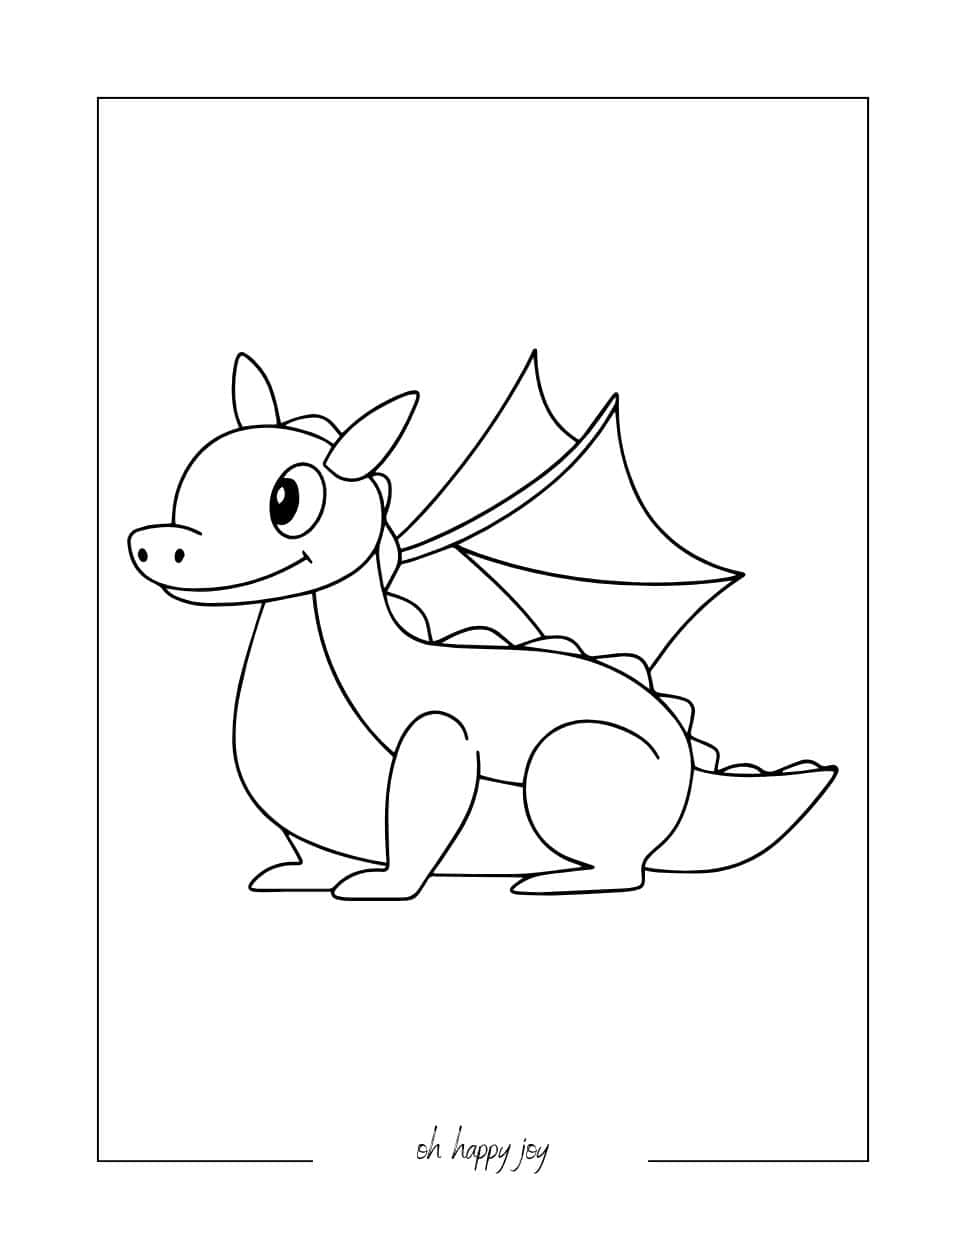 Cute Dragon Coloring Page